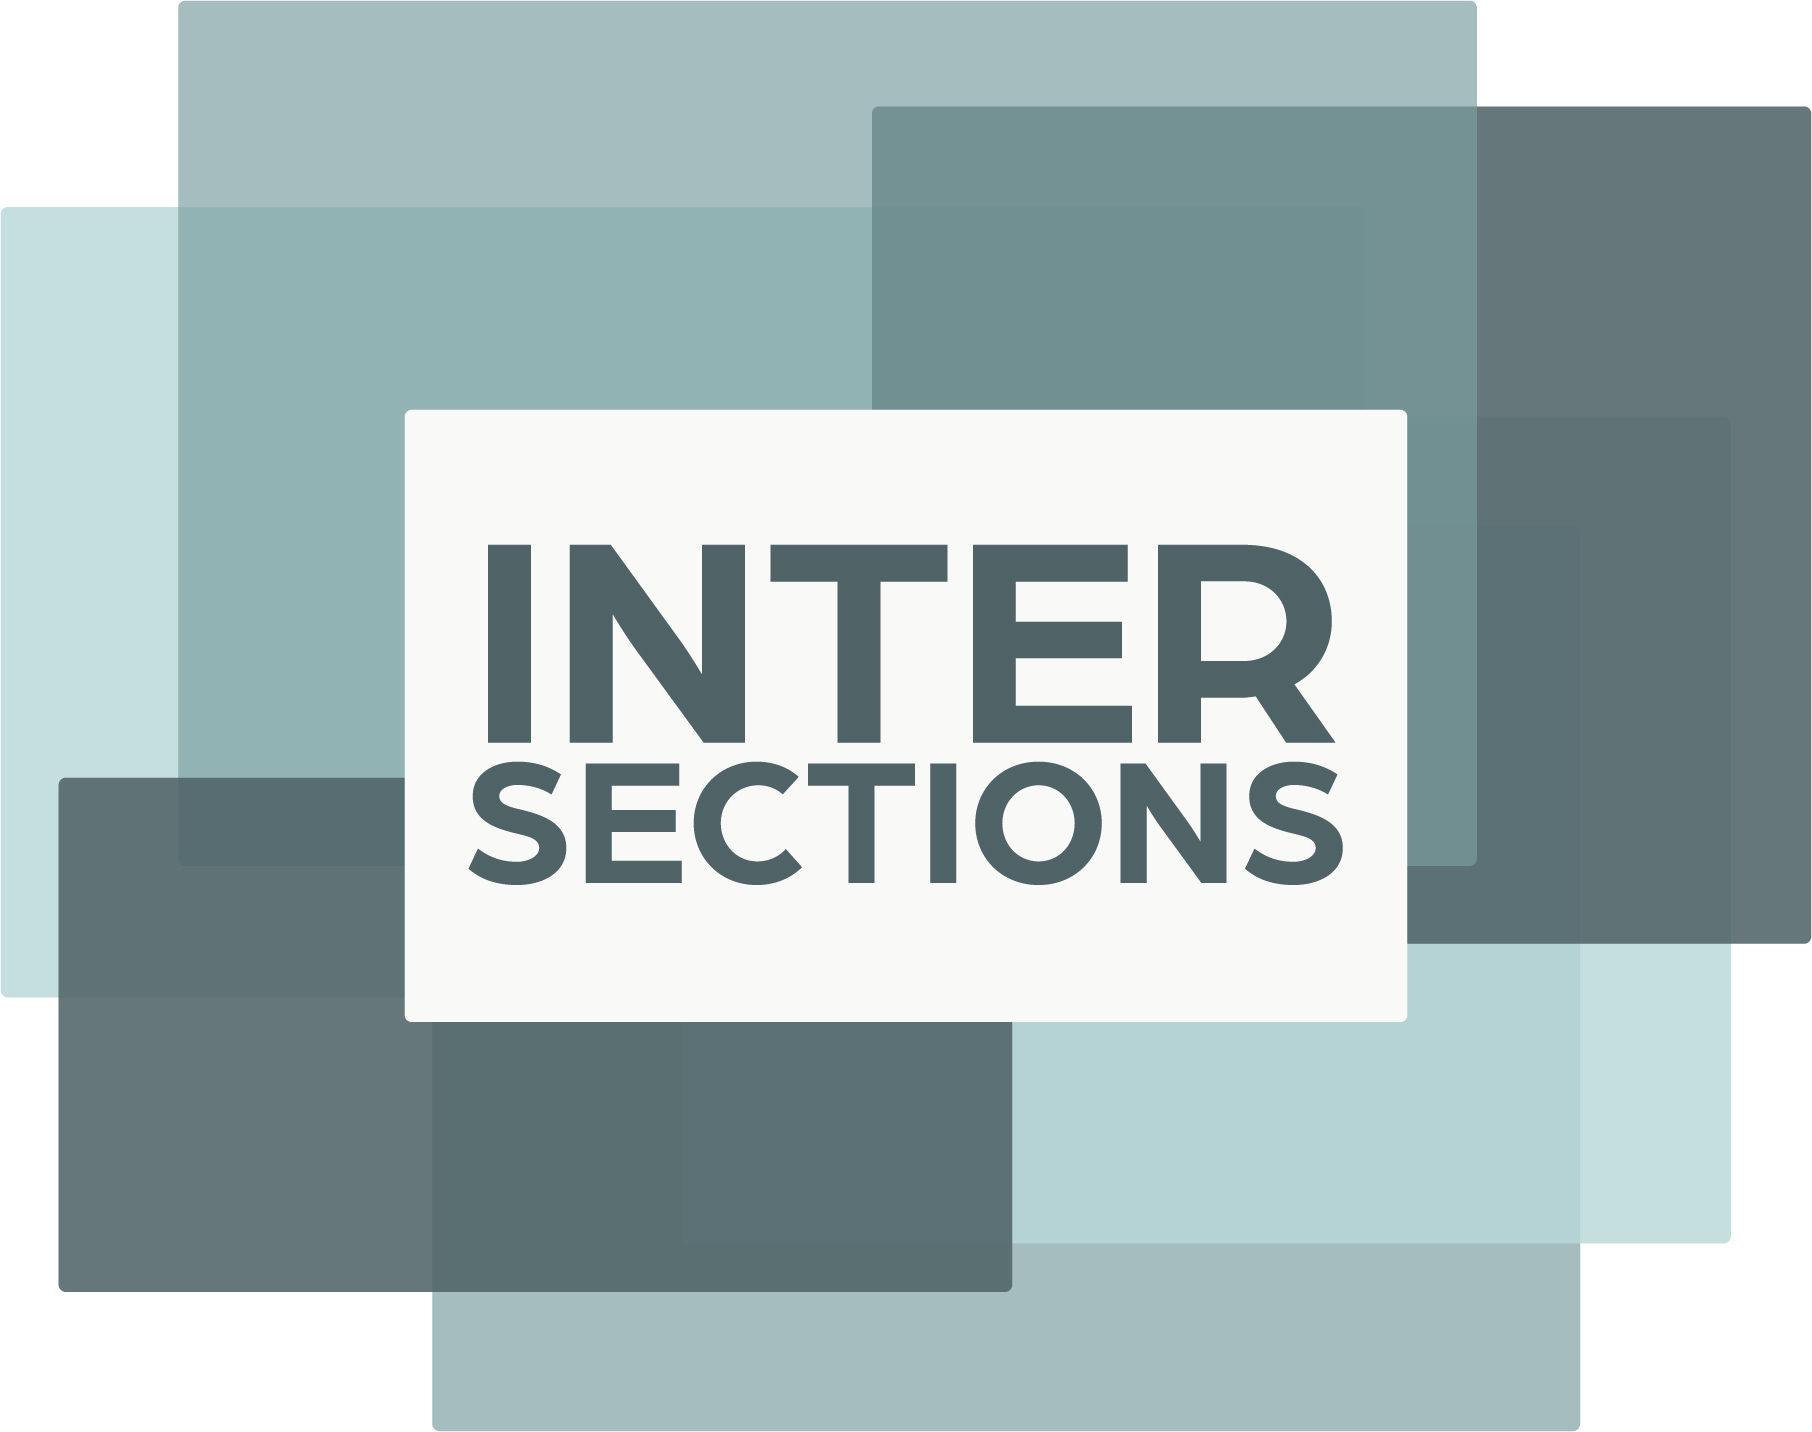 Inter/Sections